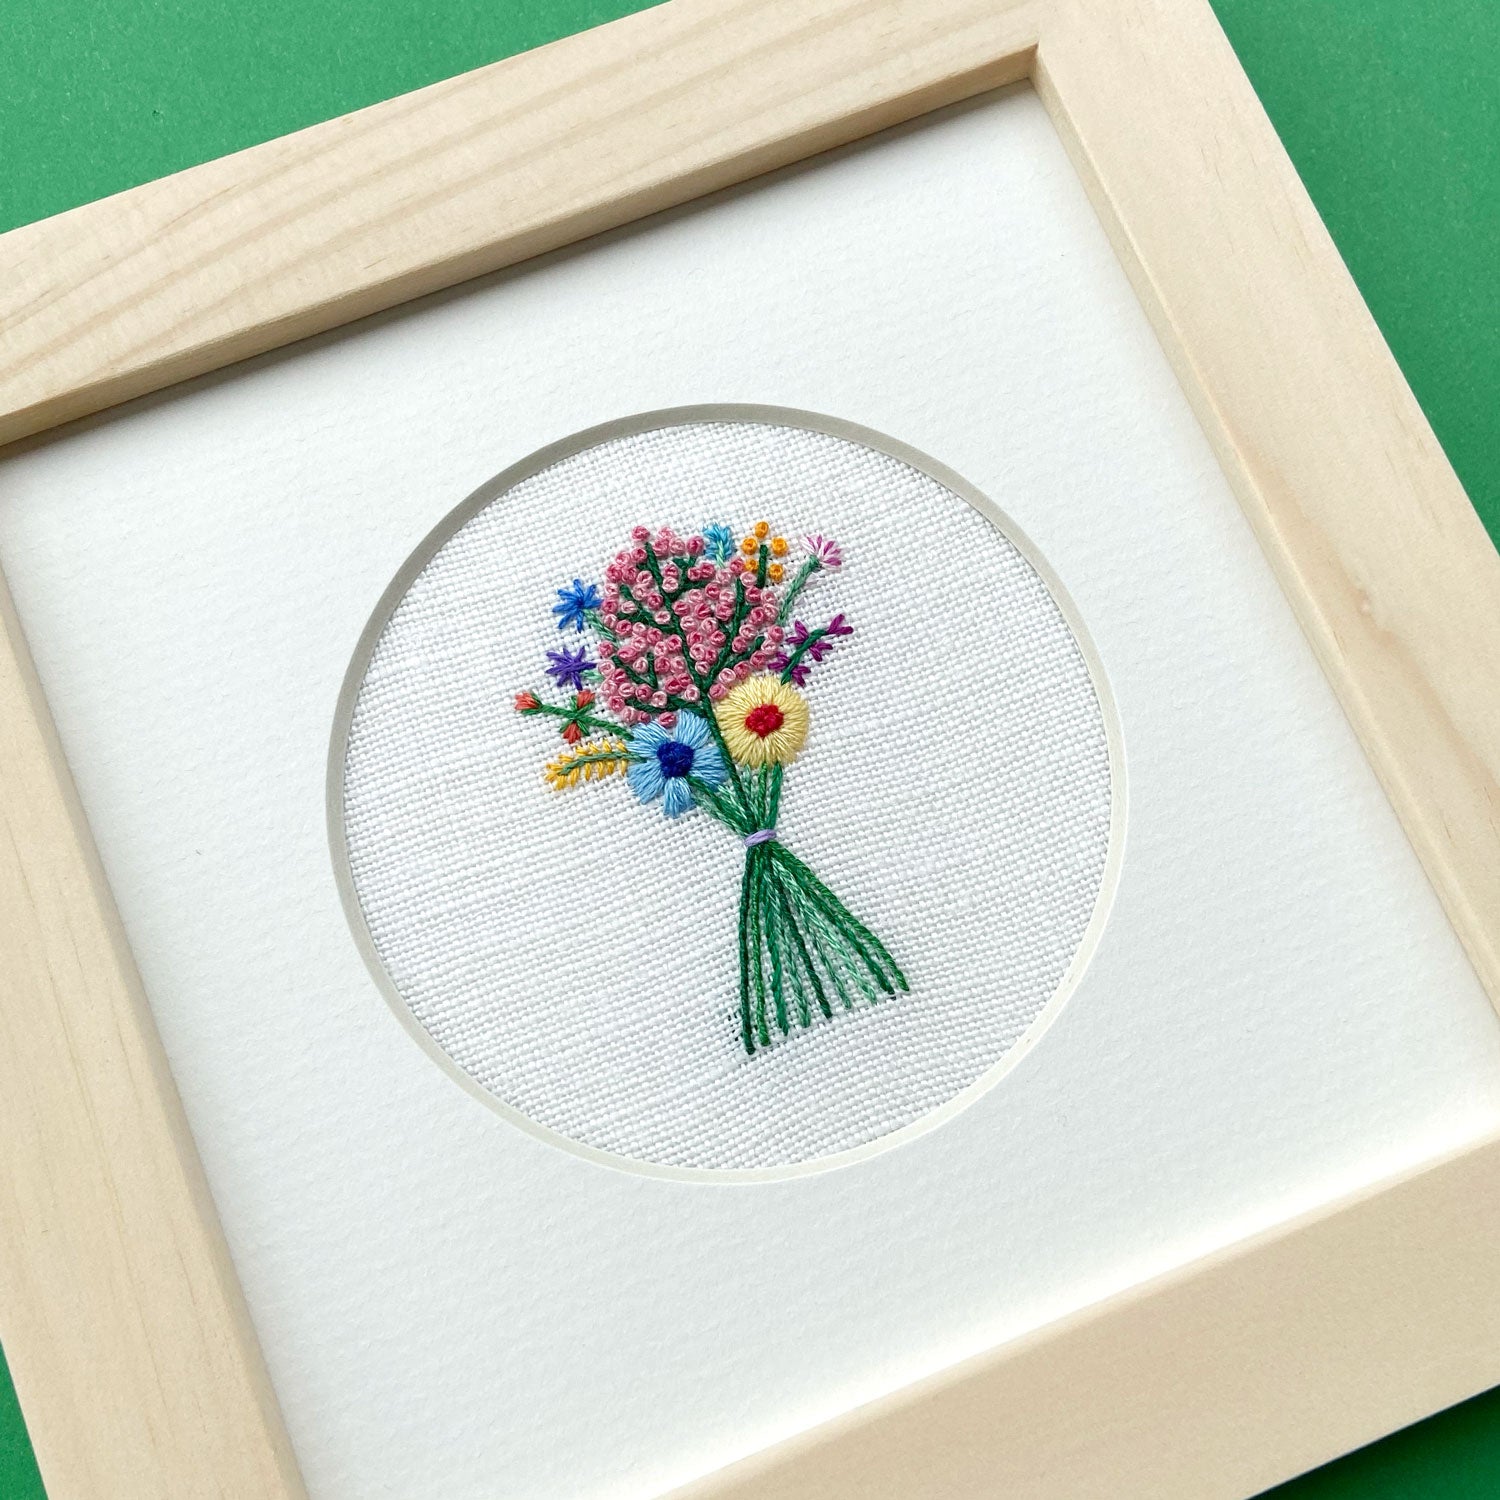 Rainbow Bouquet with Pink Buds on Cream Linen Hand Embroidered Art